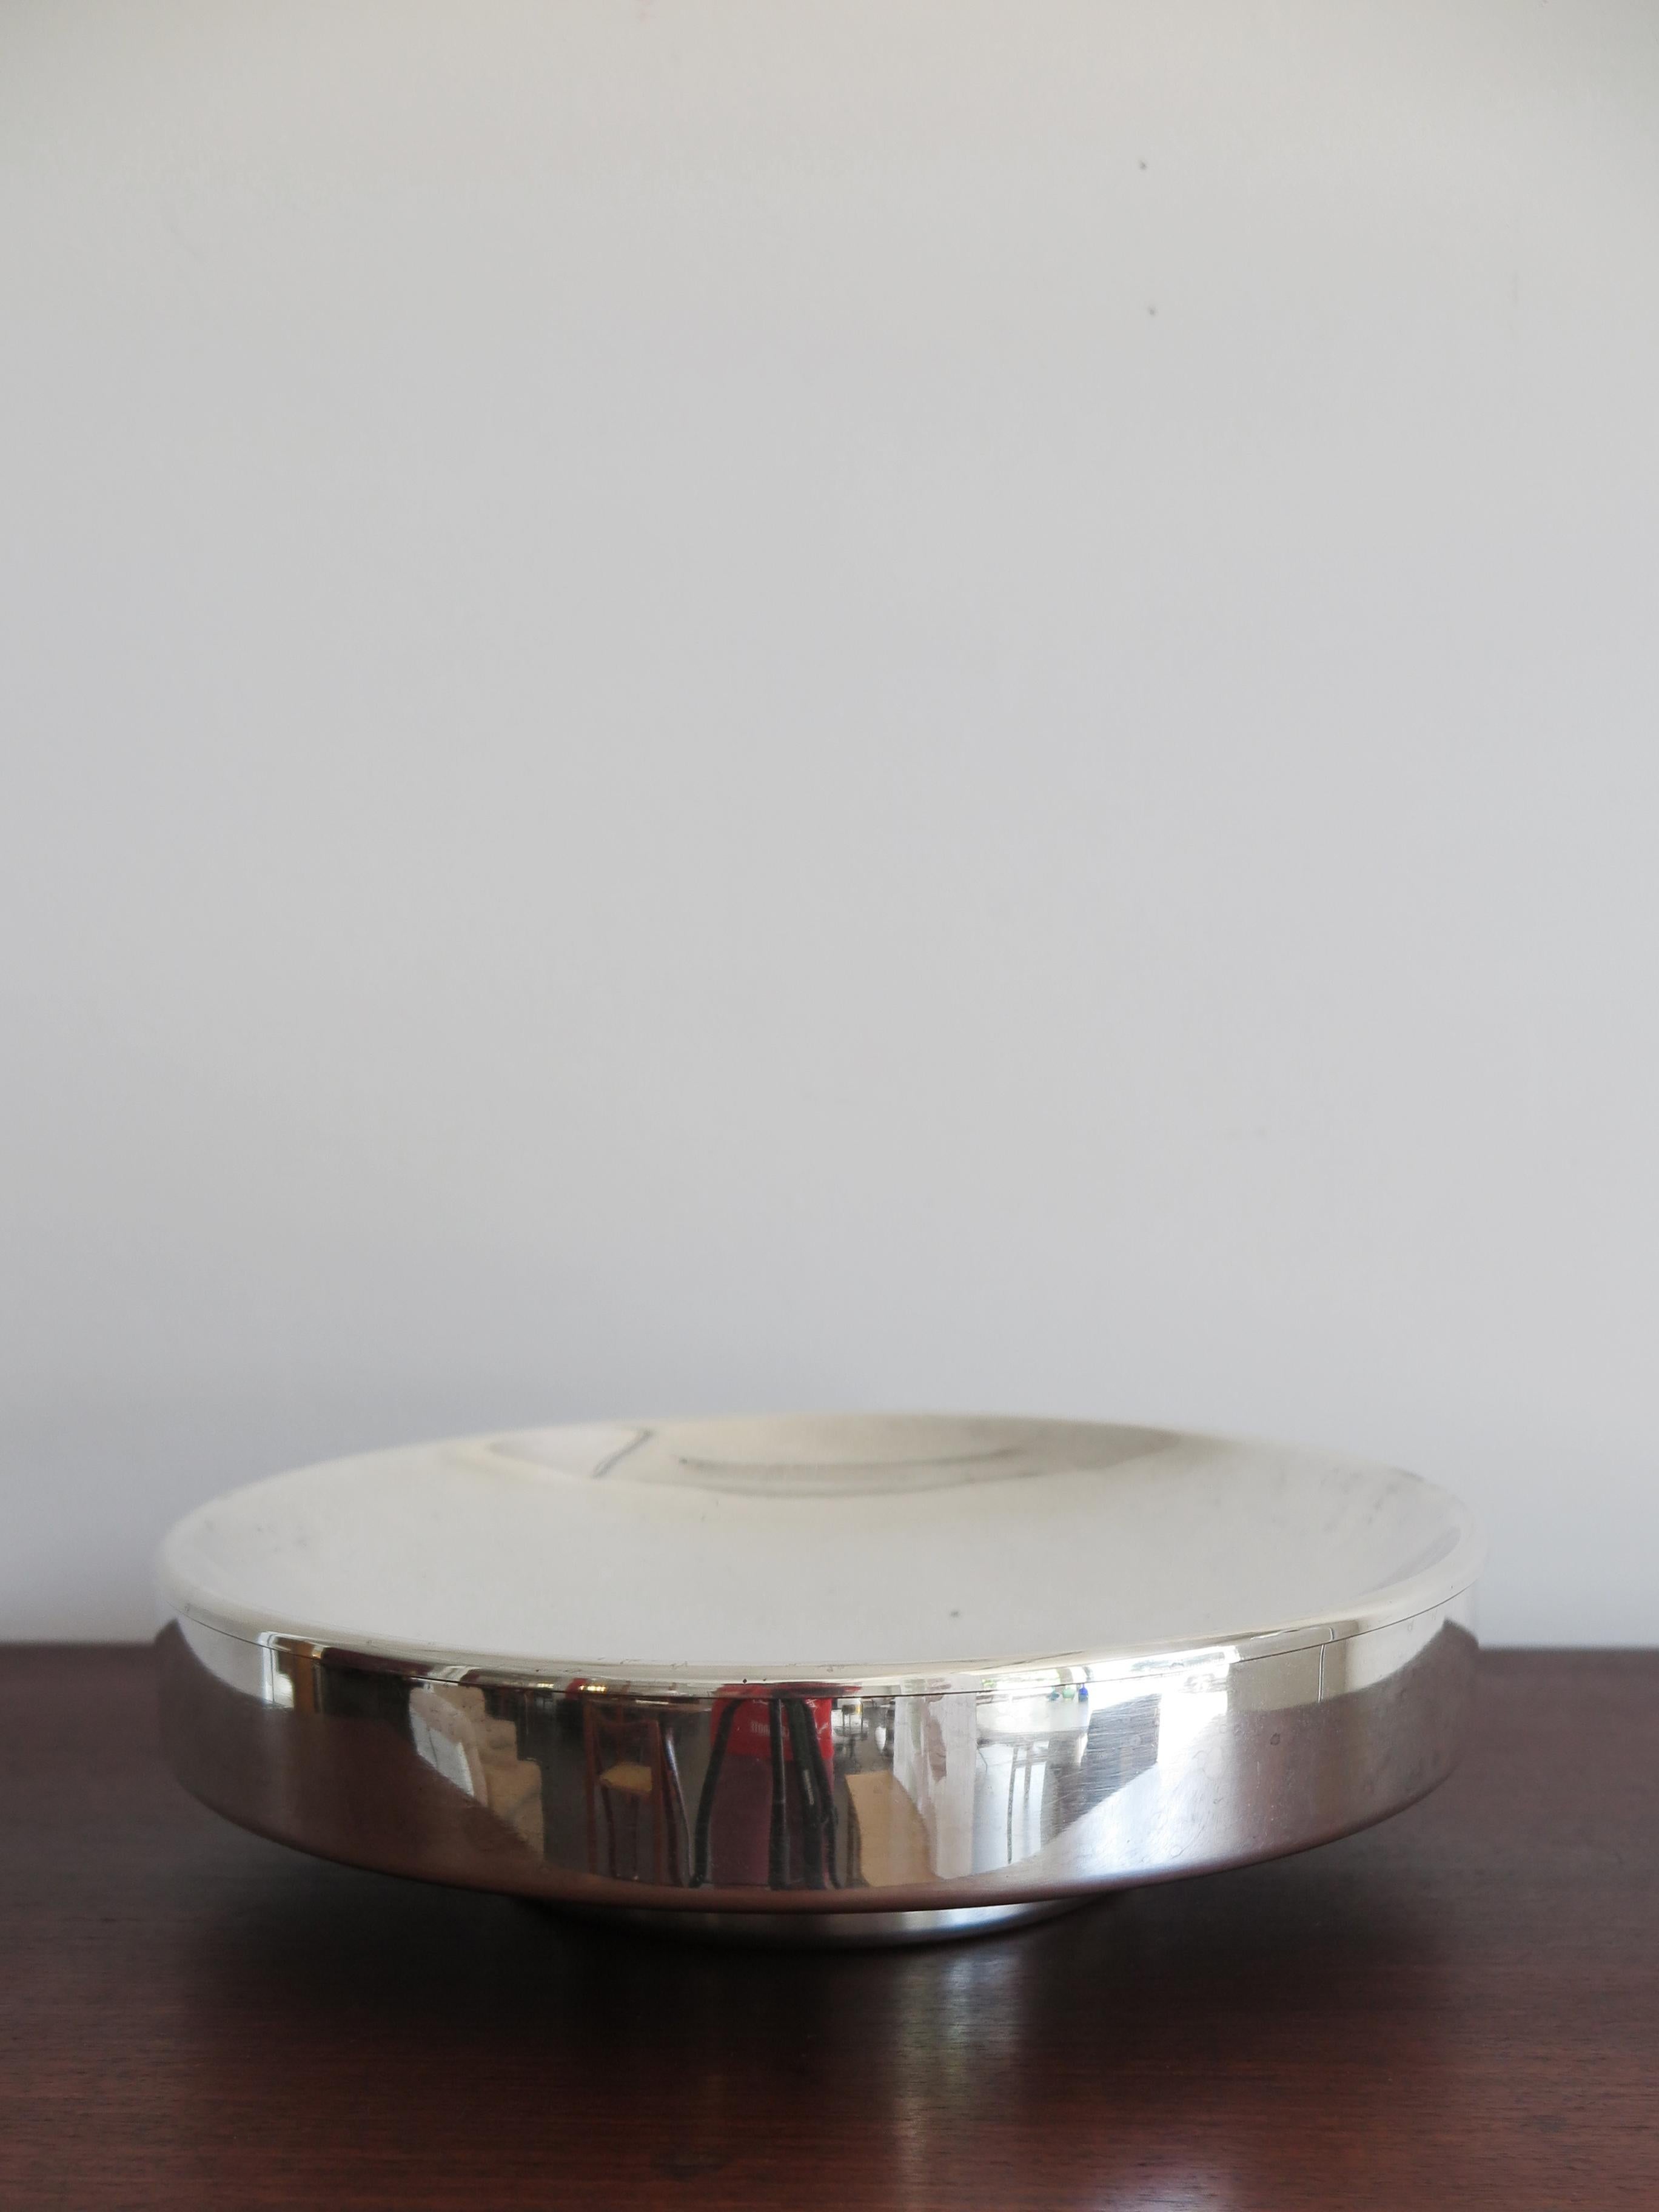 Italian silver-plated metal table center or emptying container designed by Lino Sabattini for Argenterie Sabattini with stamped mark under base “Sabattini Made in Itay” 1970s.
Please note that the item is original of the period and this shows